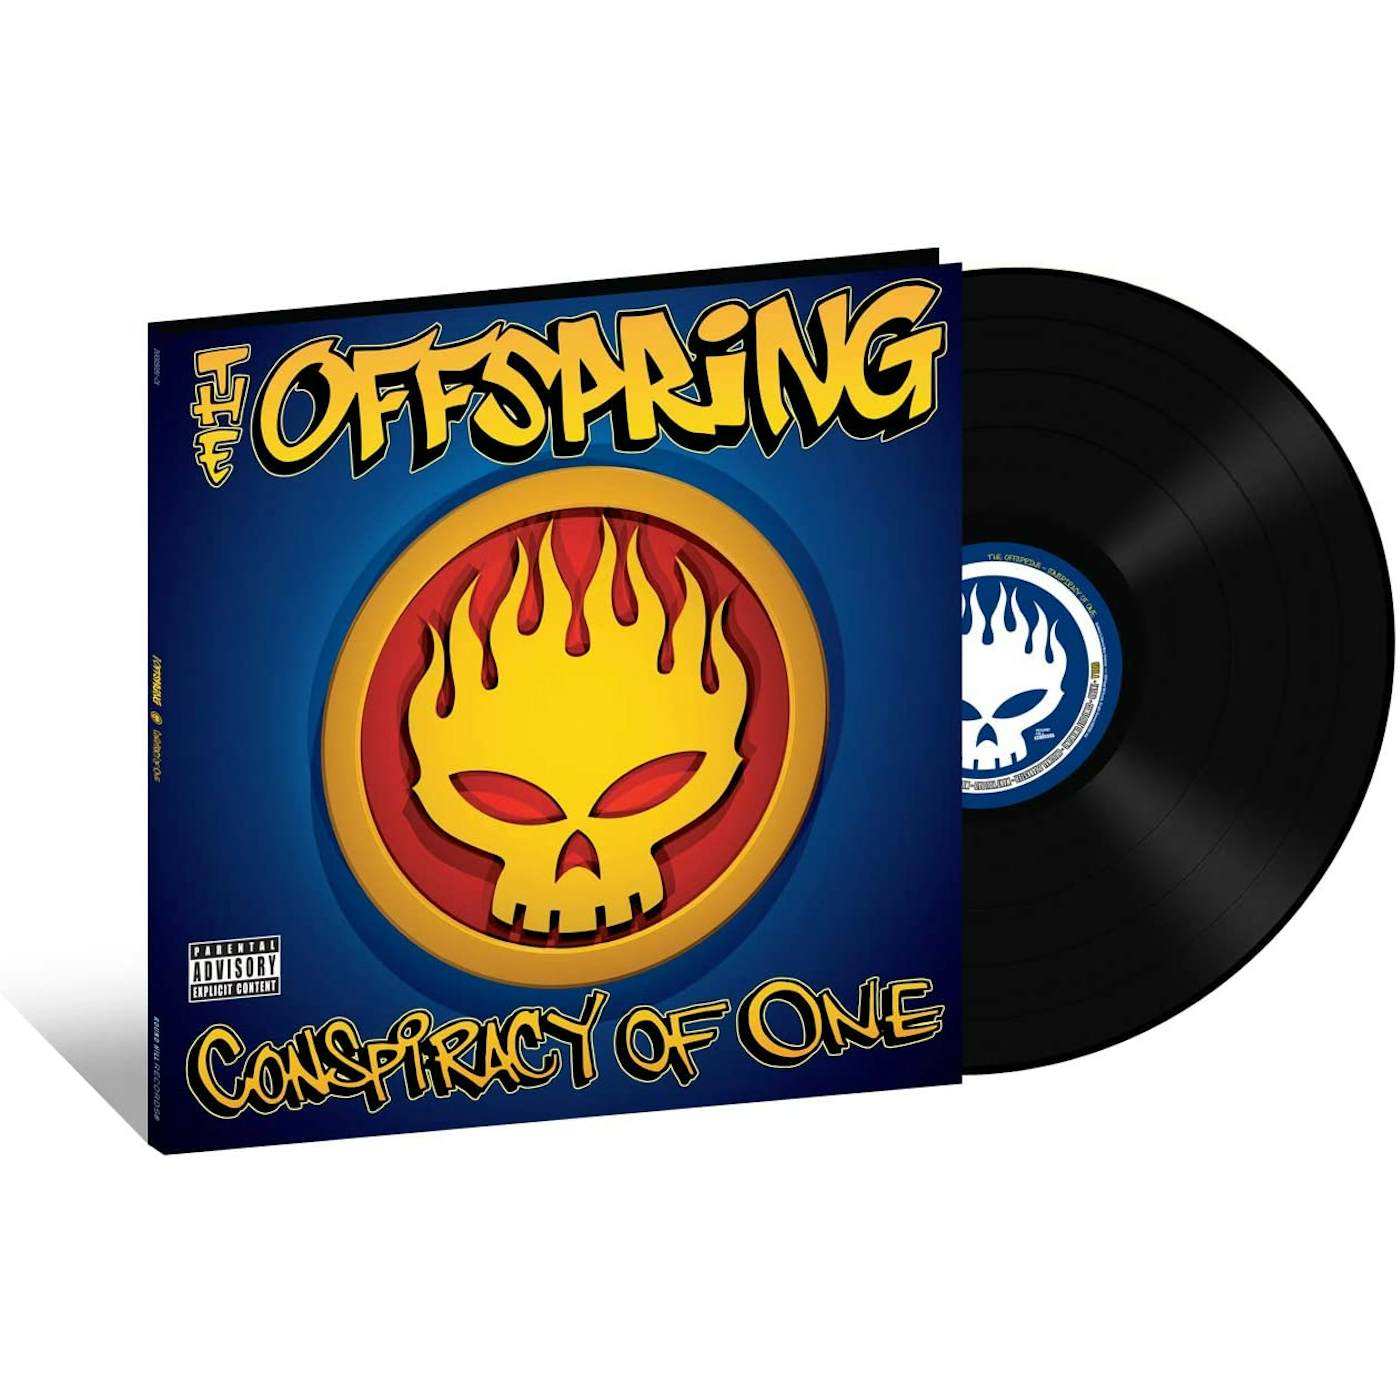 The Offspring - Conspiracy of Us (Vinyl)